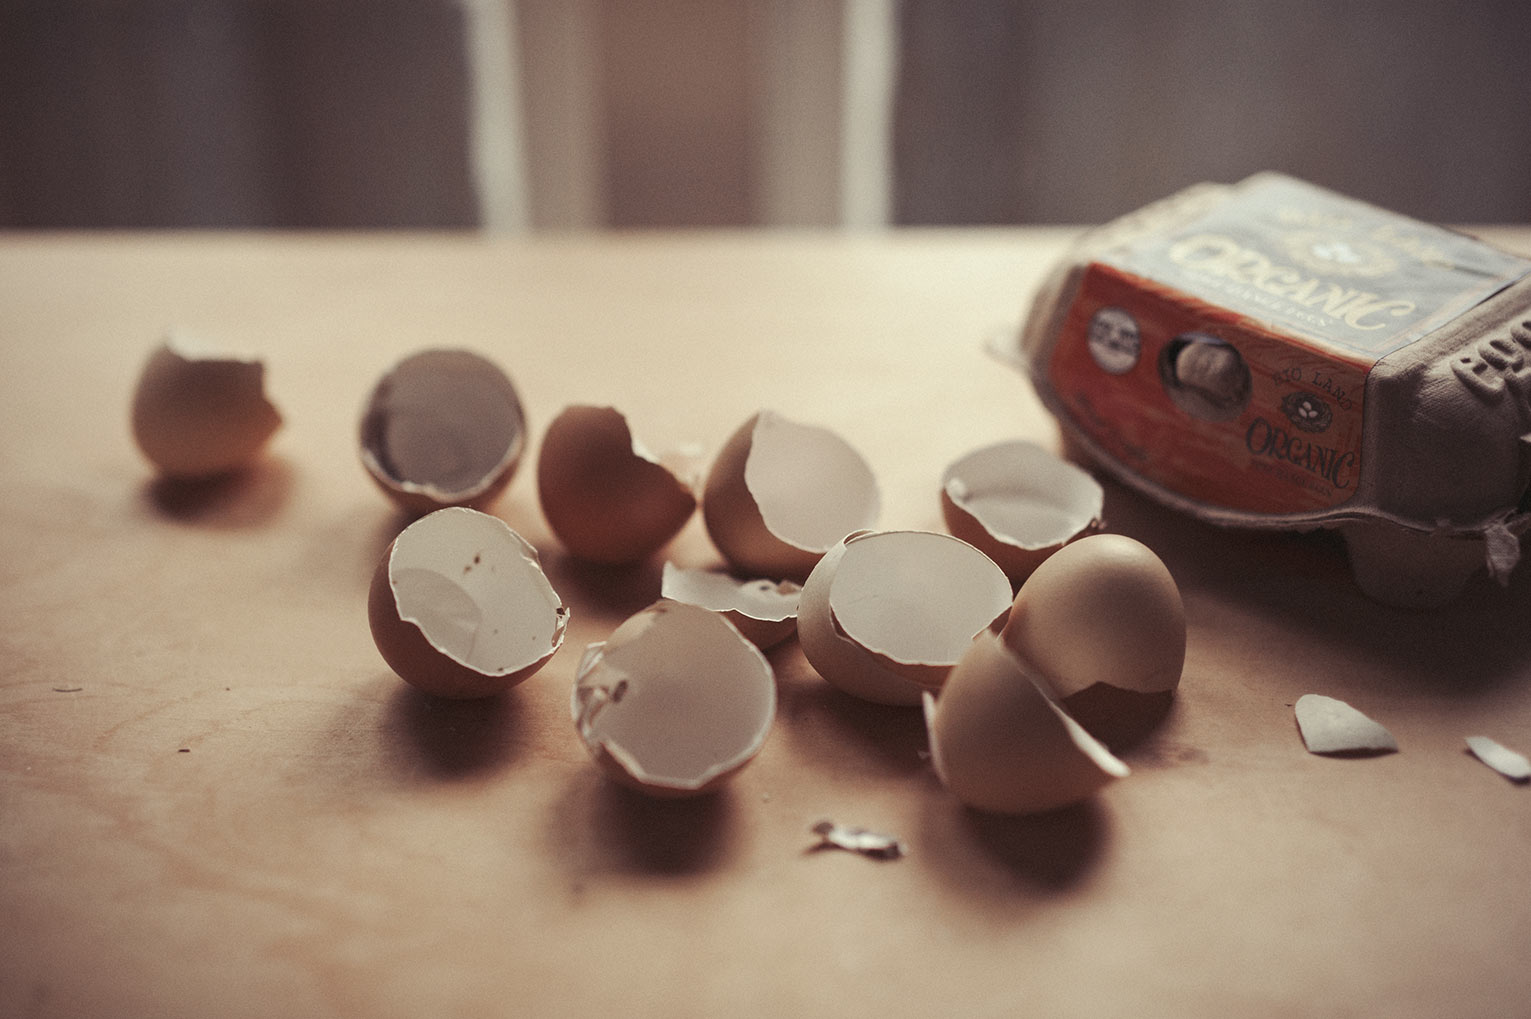 A number of egg shells are displayed next to their carton on a table-top